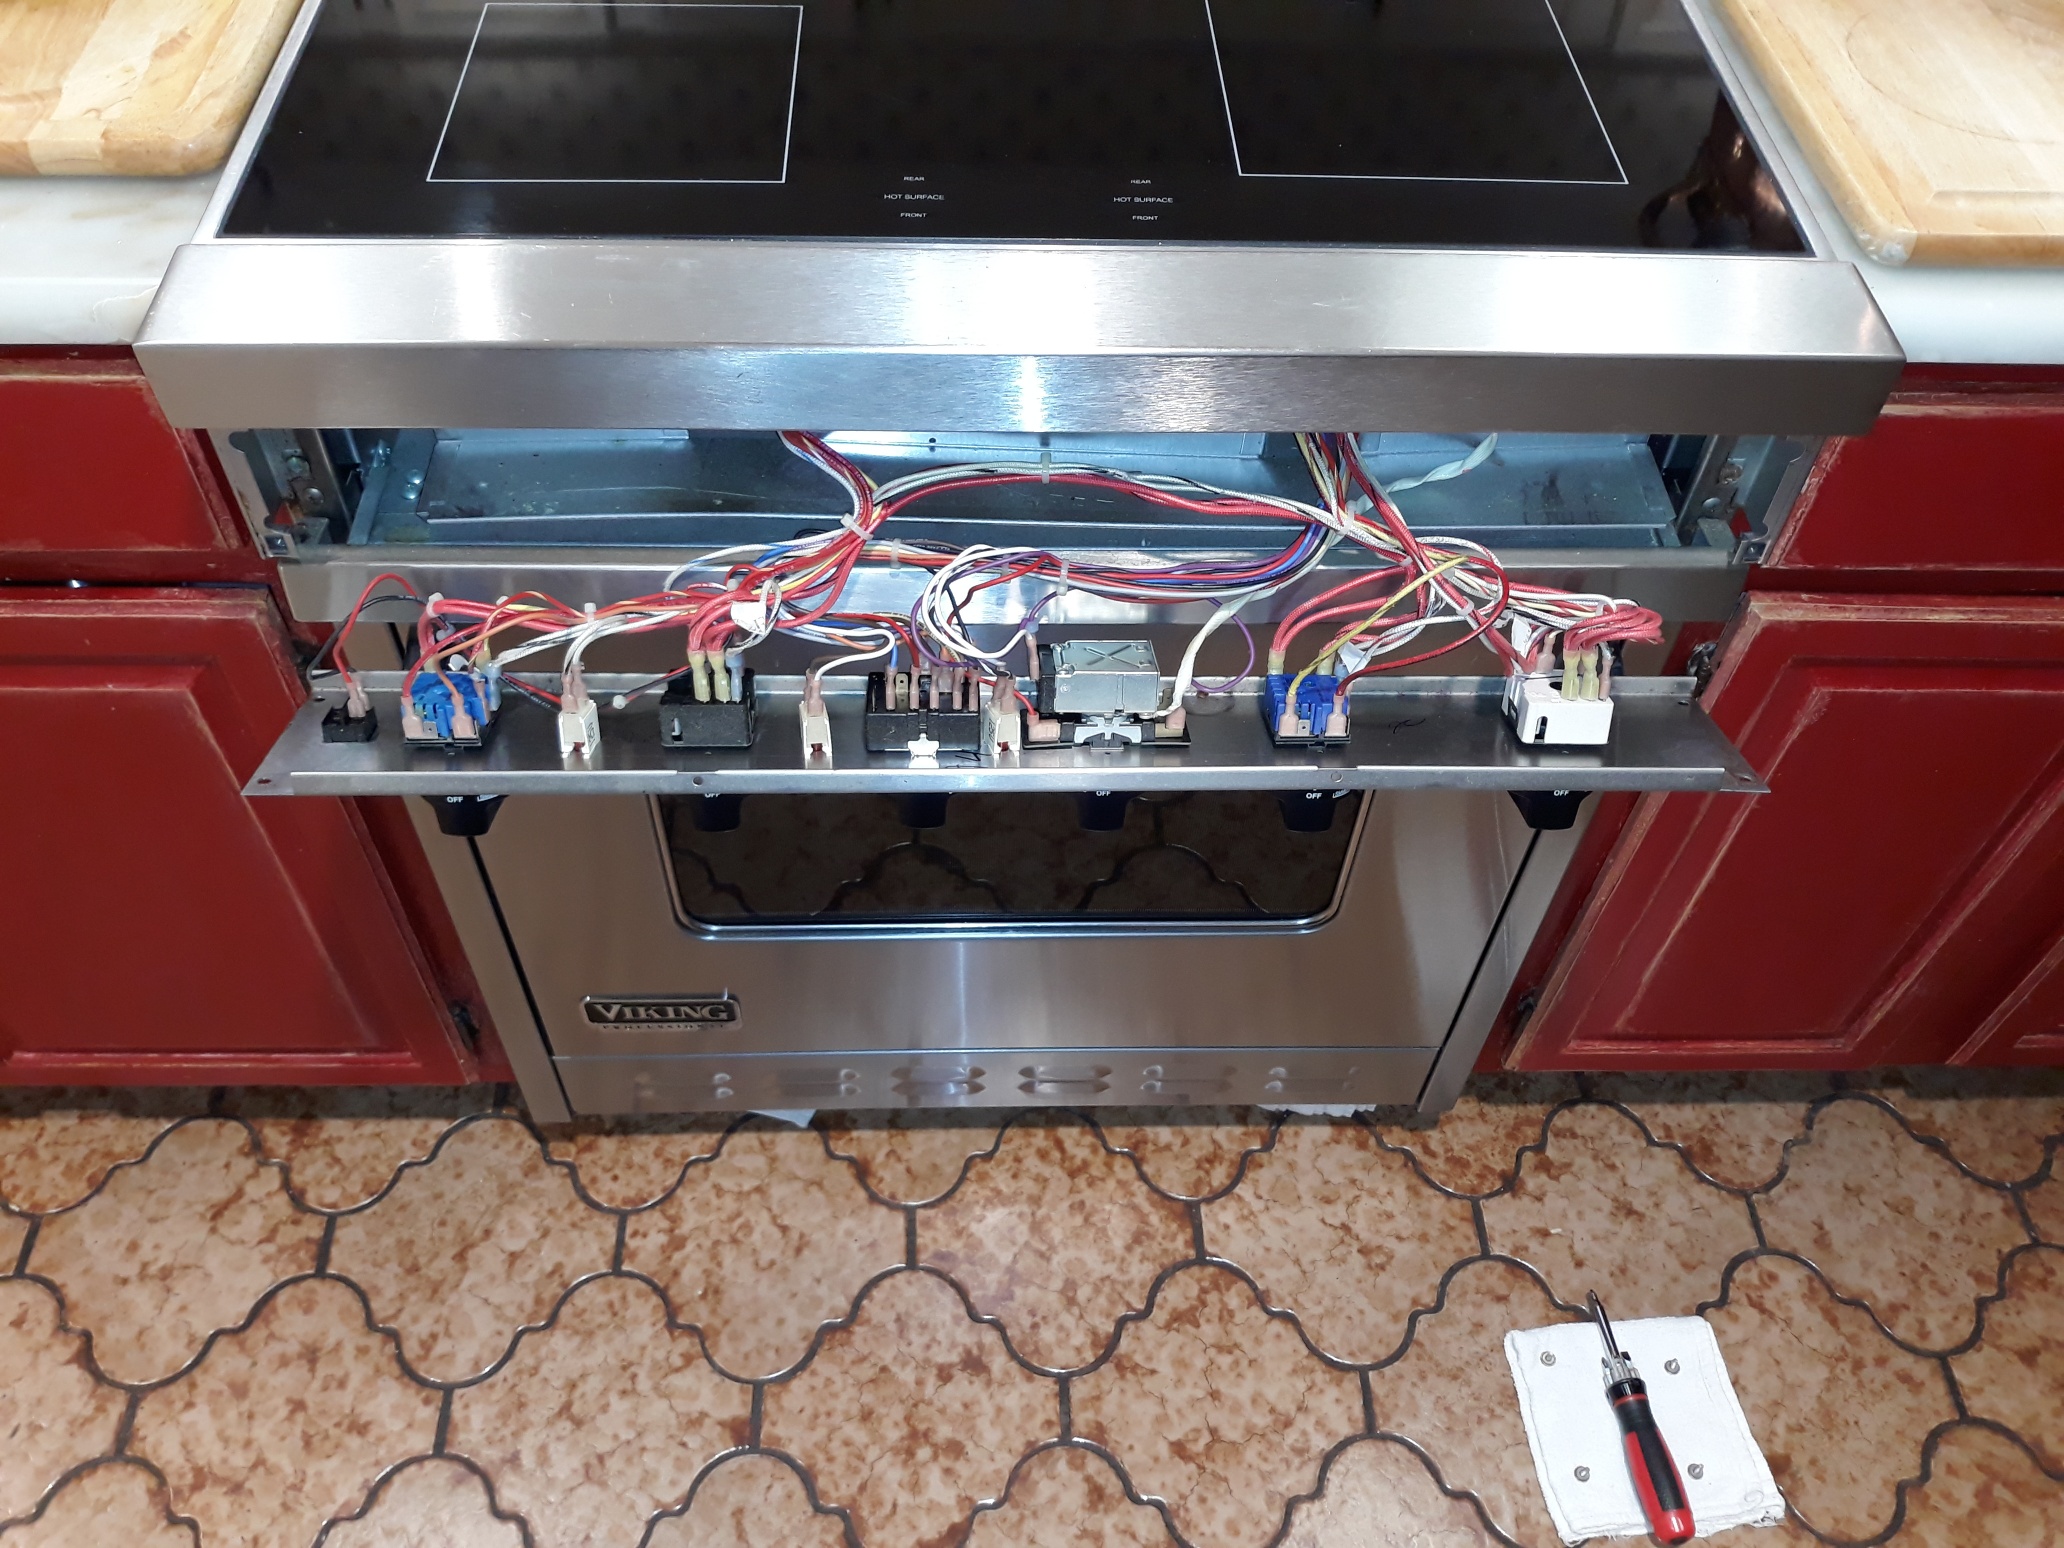 appliance repair cooktop repair repair require replacement of the control switches due to ware and age brookline cir sumterville fl 33585